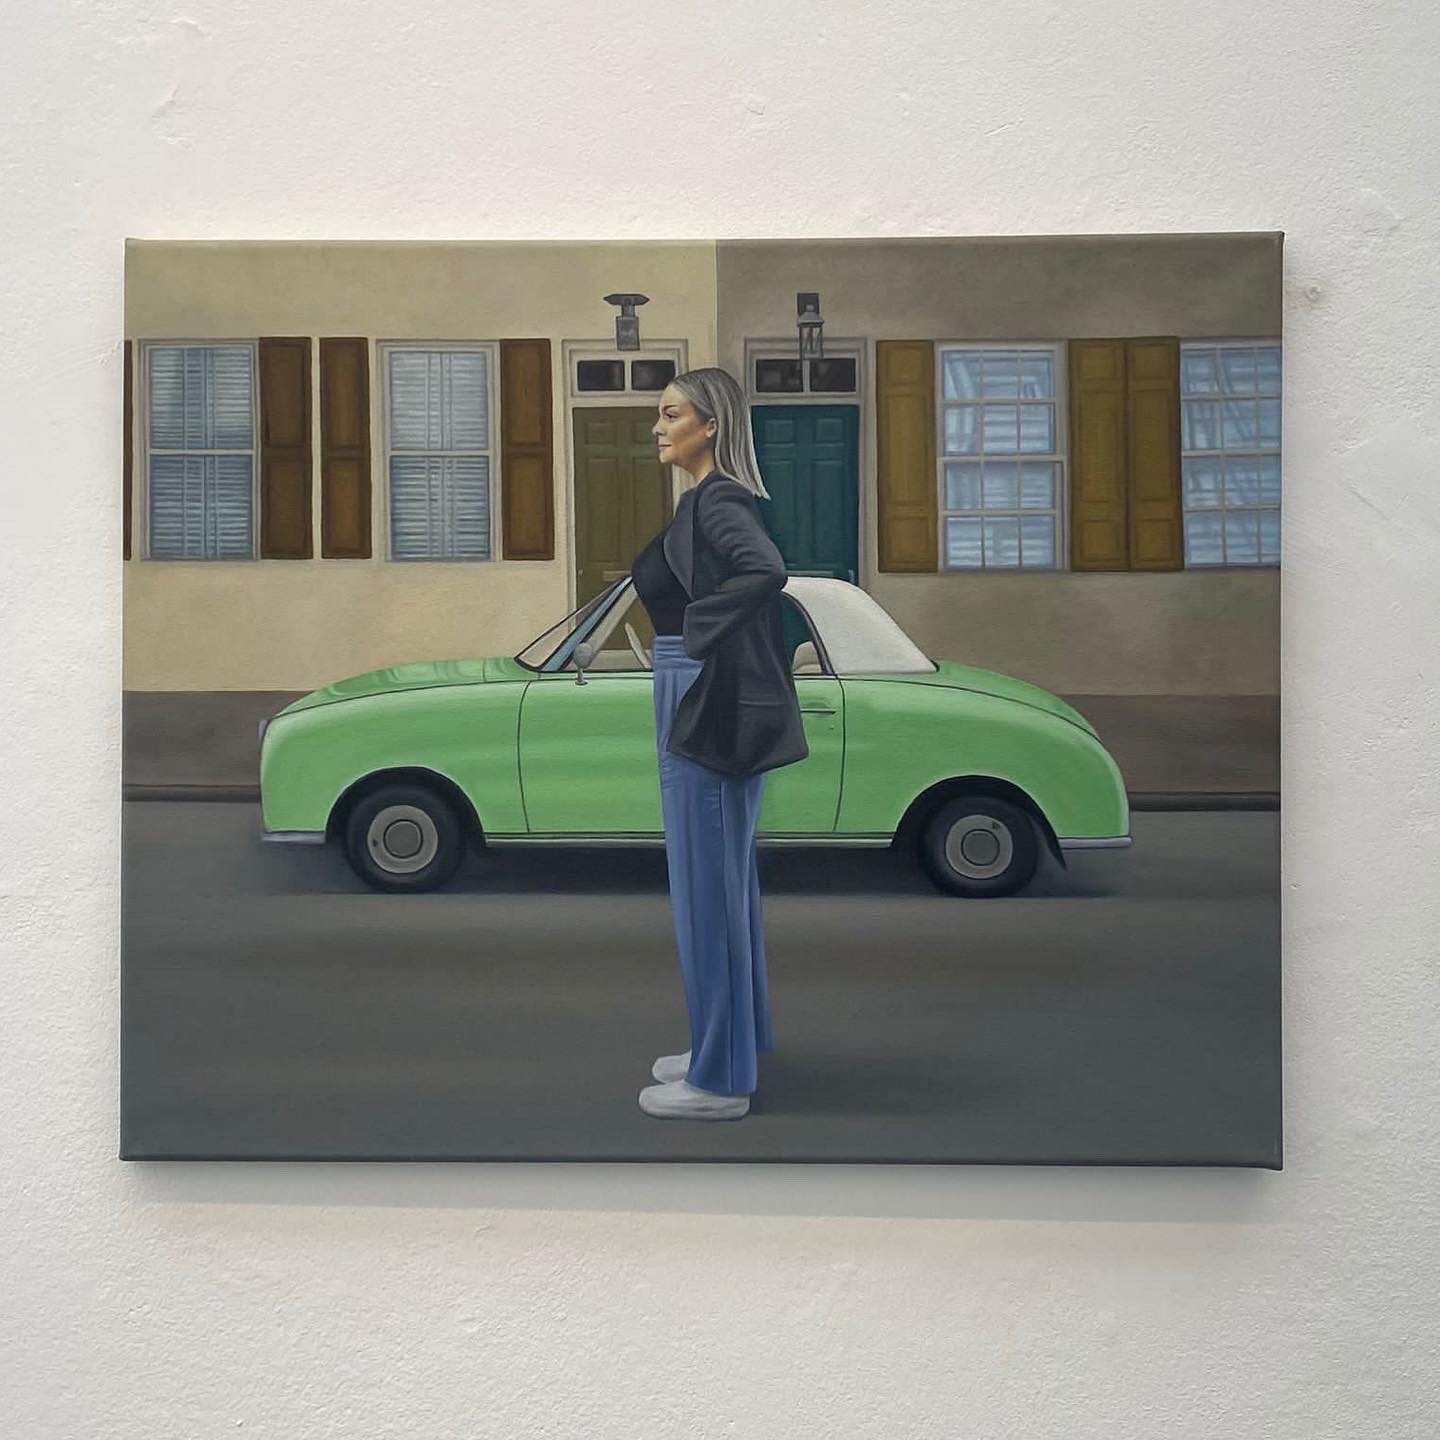 BA Fine Art work by Jessica Fearon showing a girl standing in front of a bright green car